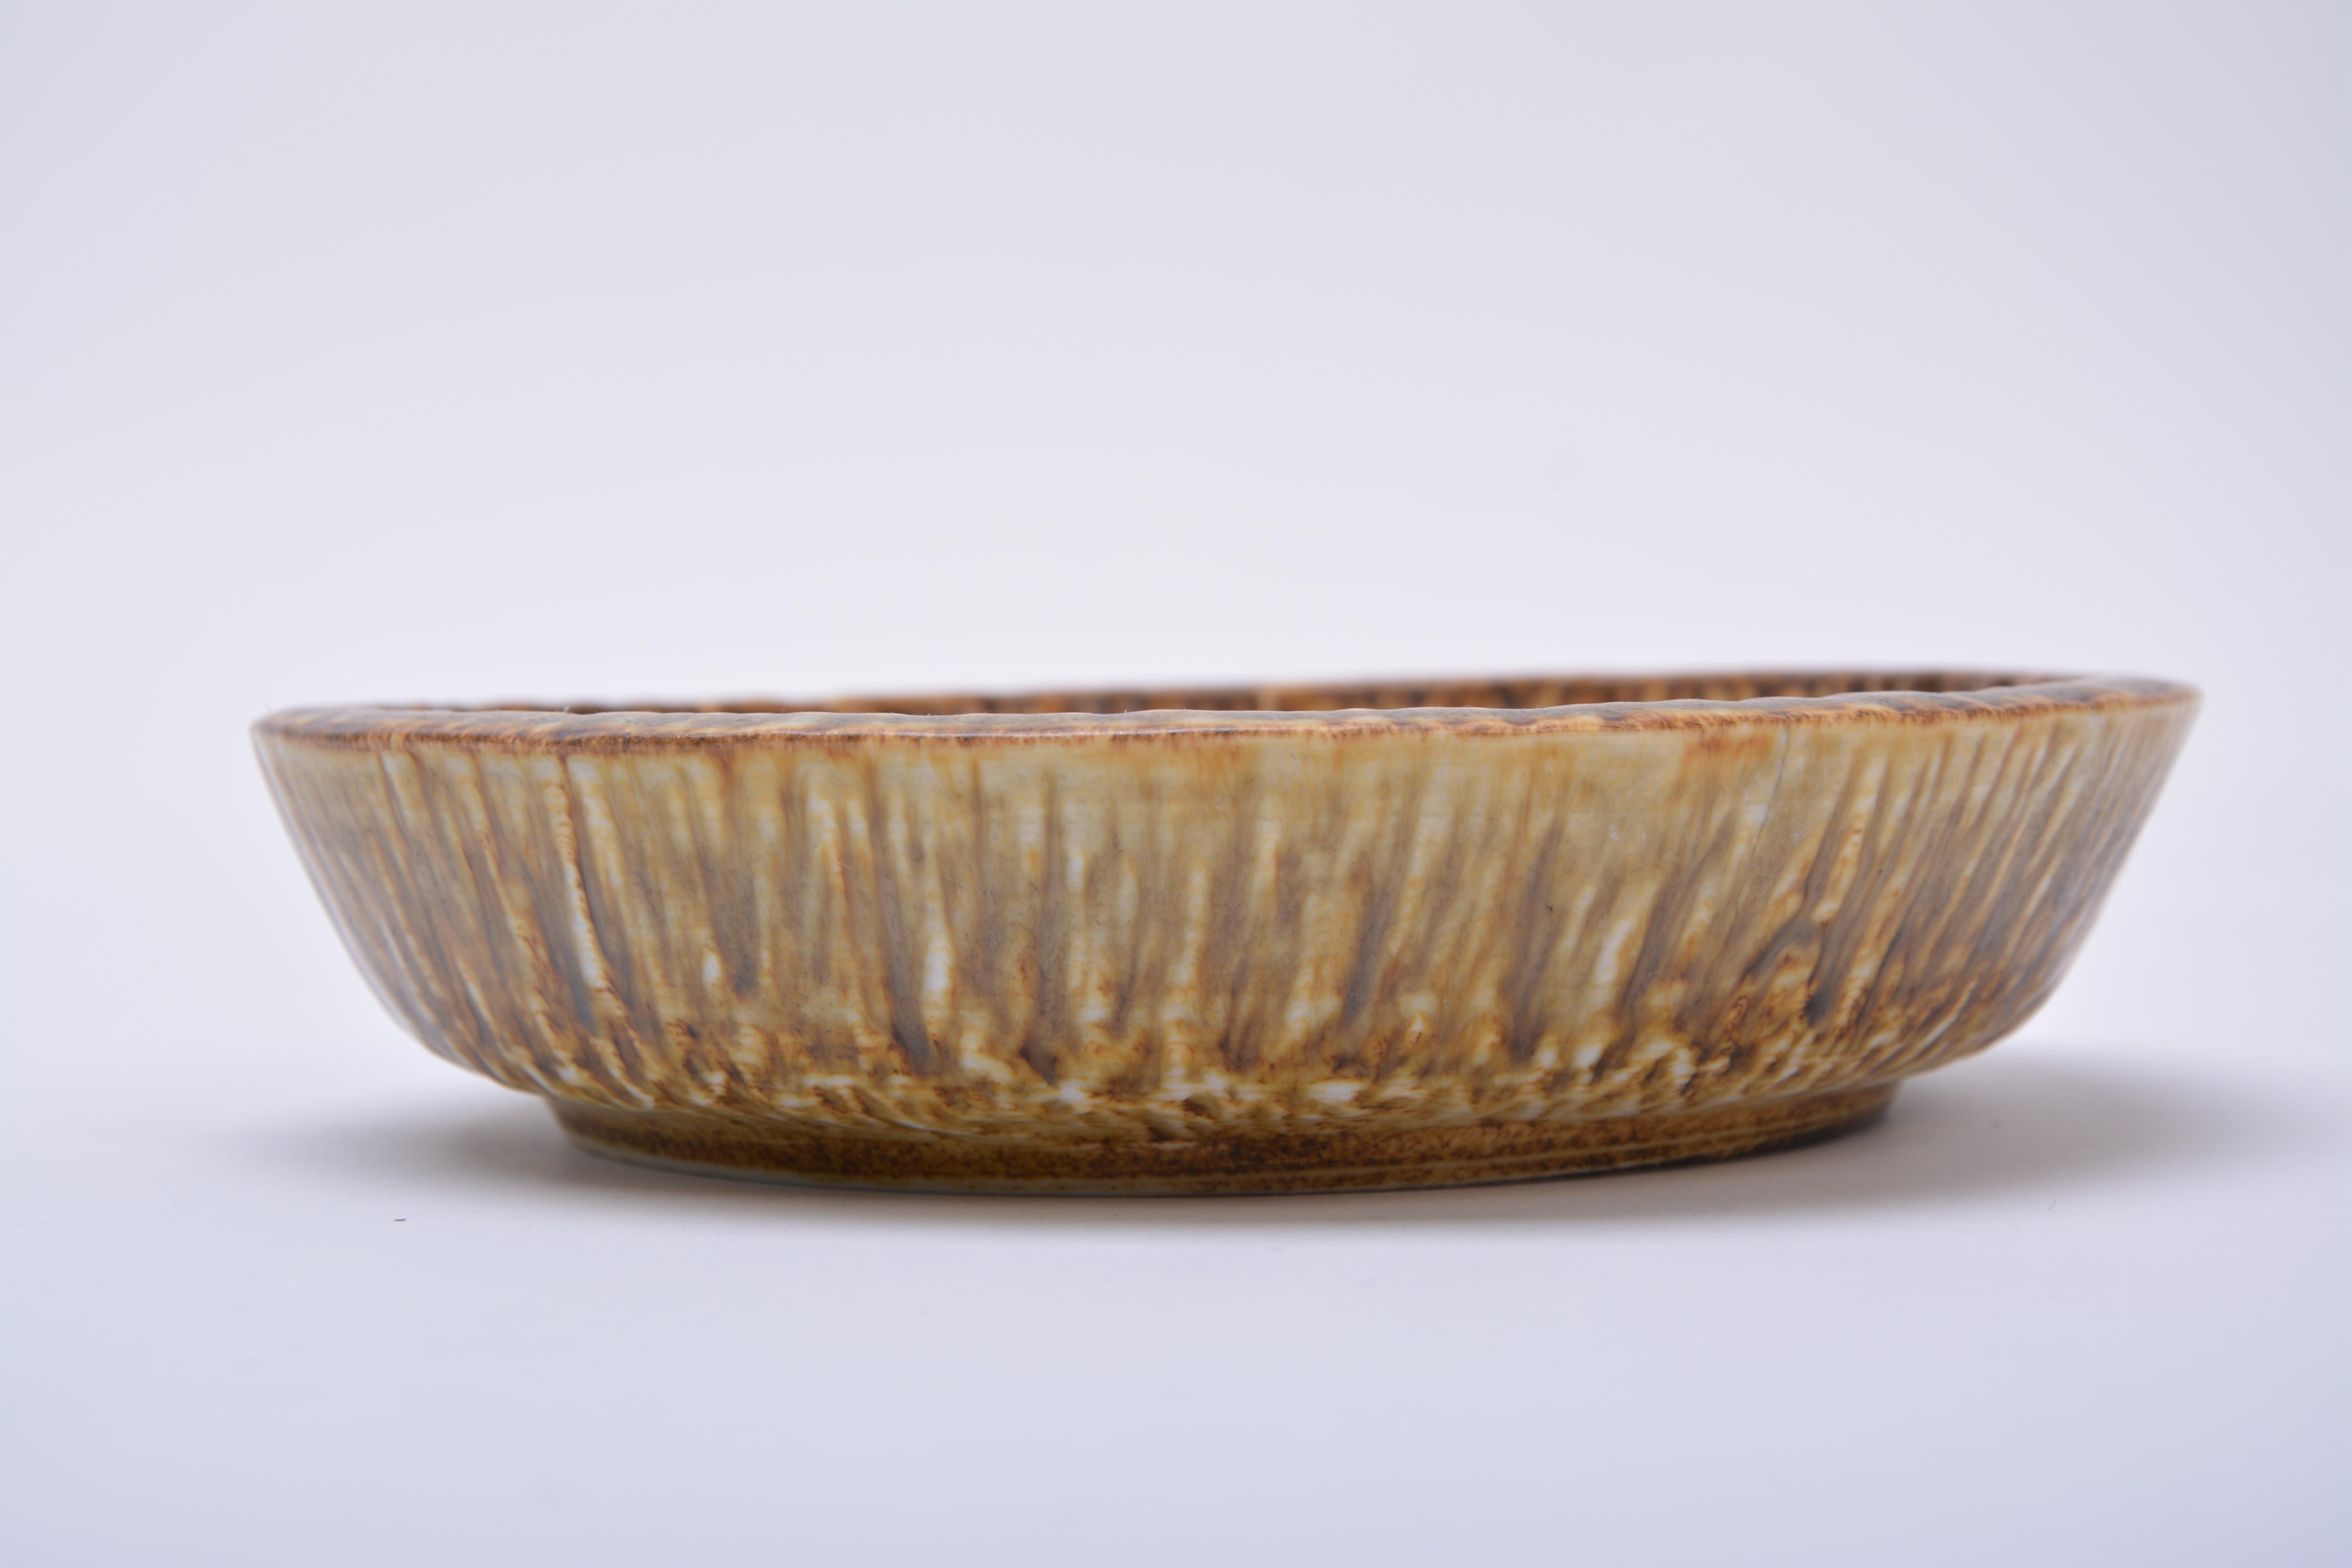 Swedish Mid-Century Modern Stoneware bowl by Gunnar Nylund for Rörstrand
- Brown and mustard colored harefur Rörstrand bowl from the Rubus pattern
- Designed by Gunnar Nylund
- Made in Sweden
- Marked with the Rörstrand hallmark, GN, the number 10,